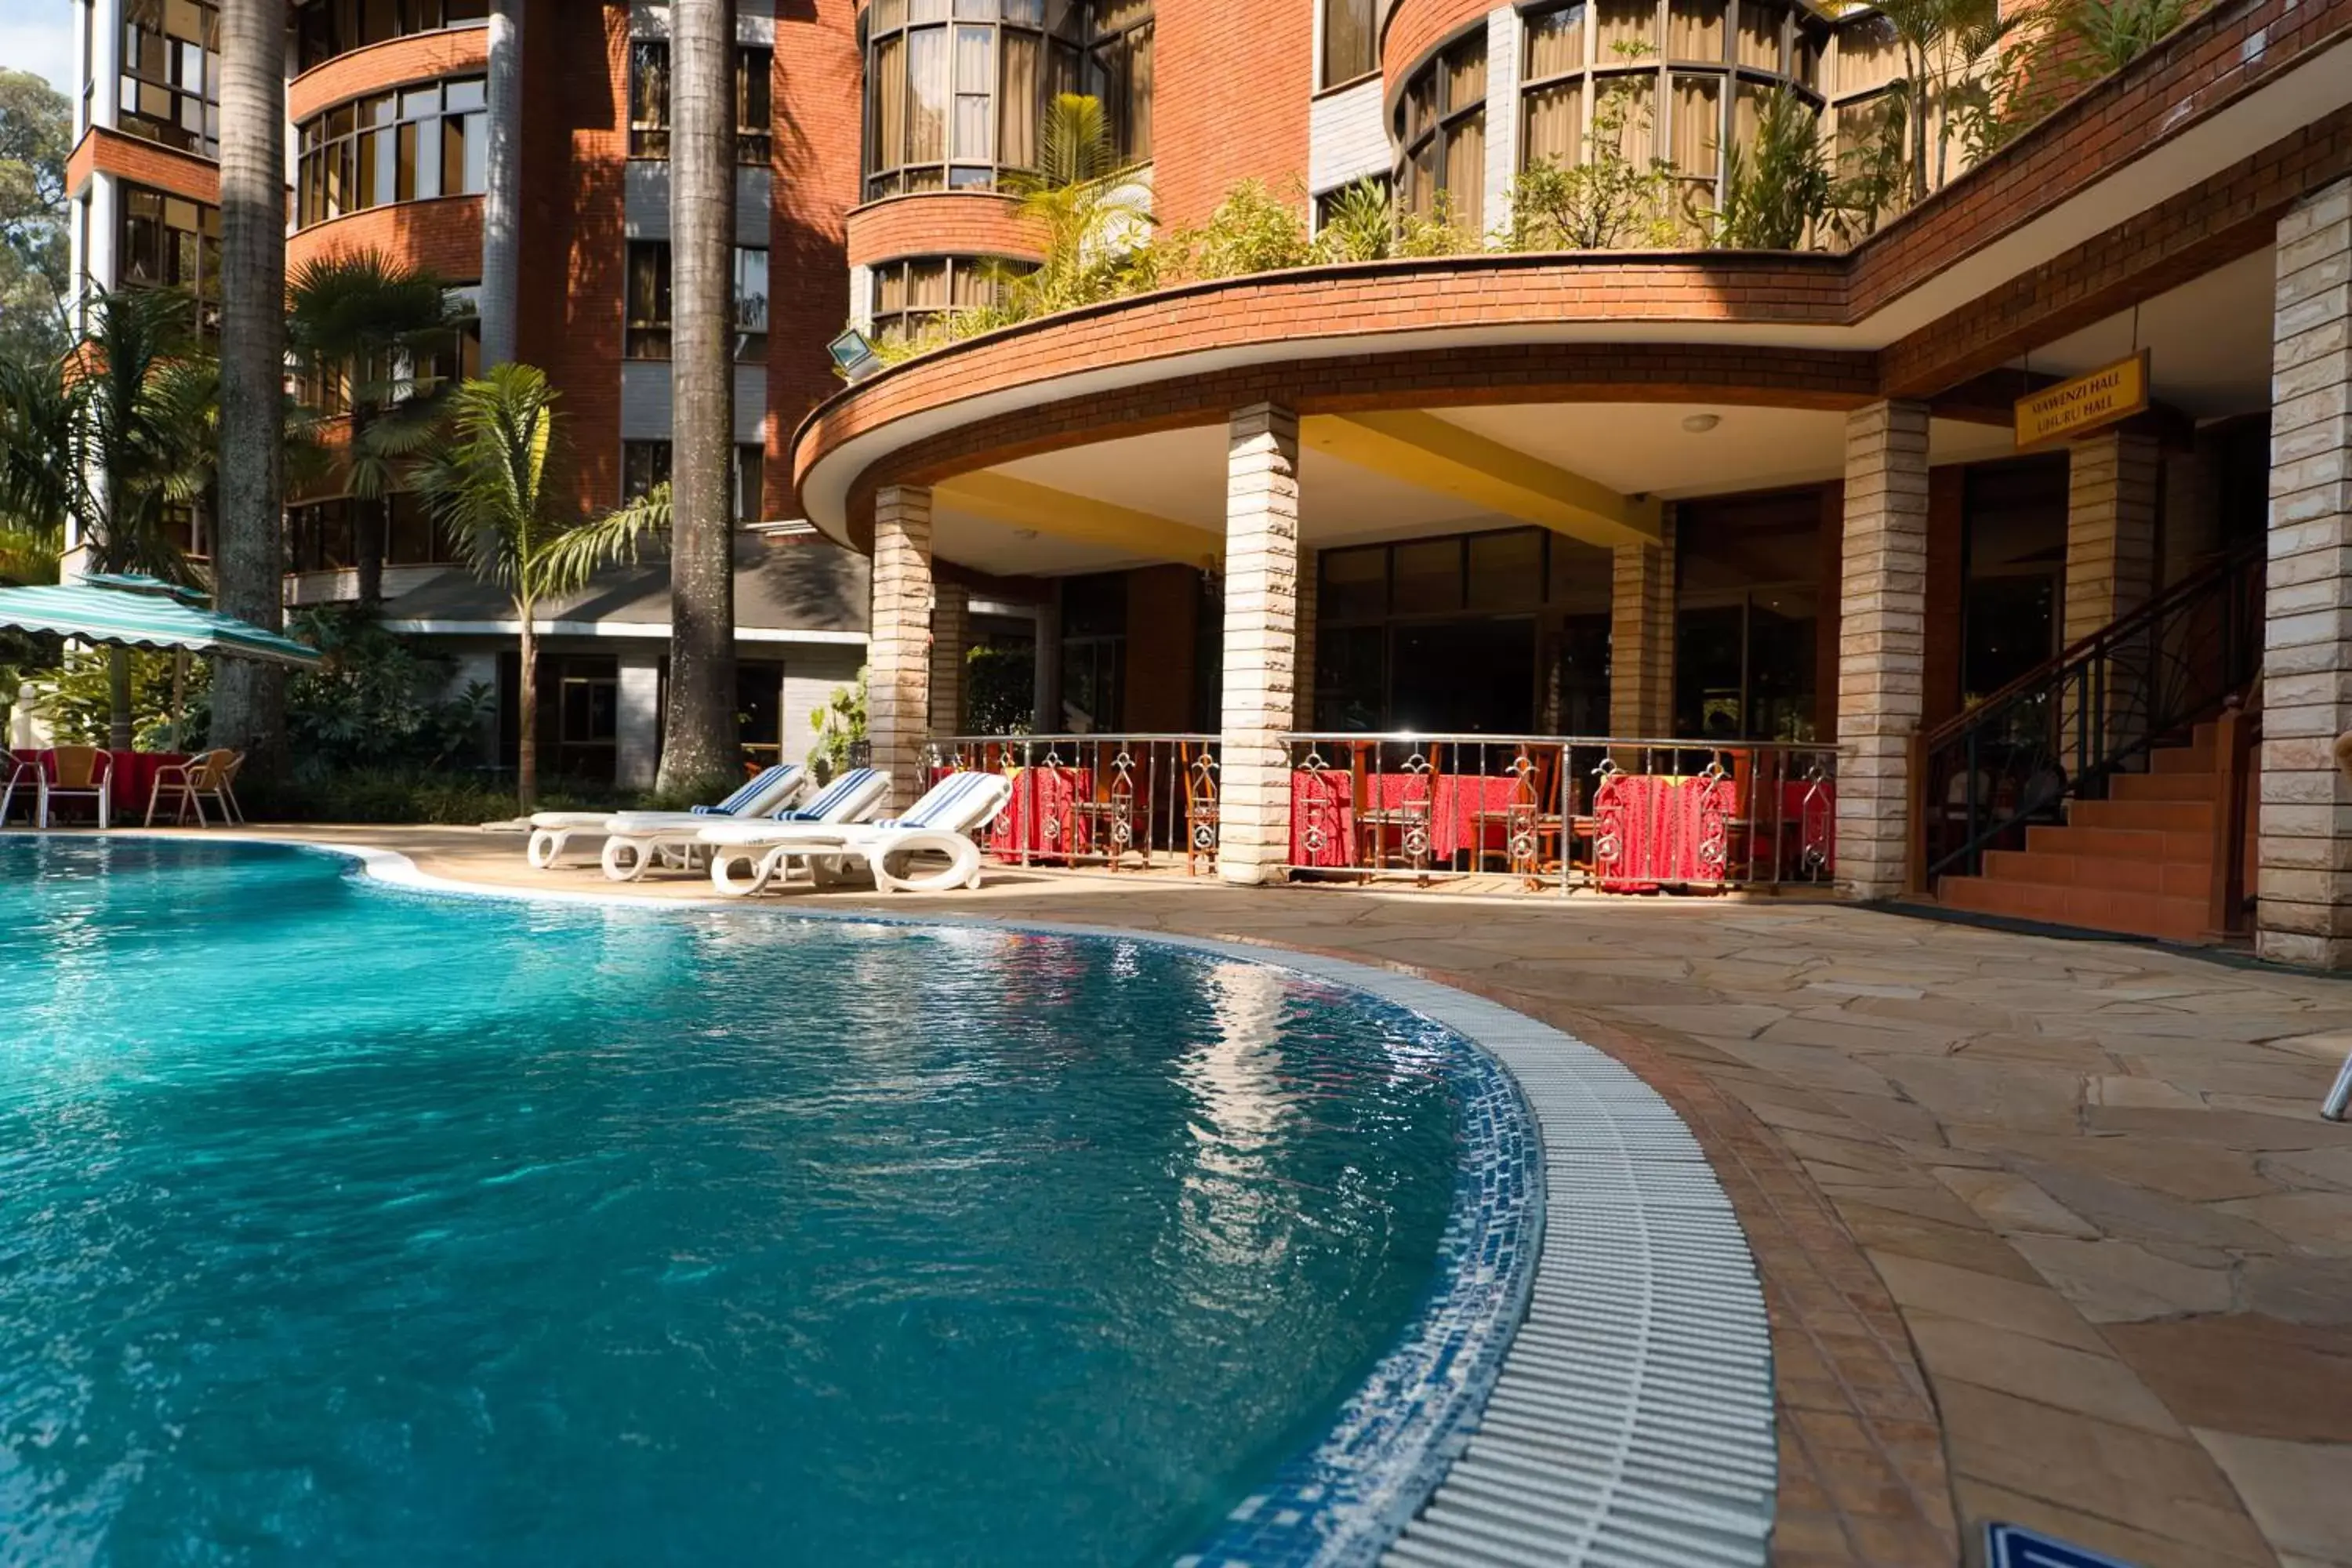 Property building, Swimming Pool in Kibo Palace Hotel Arusha